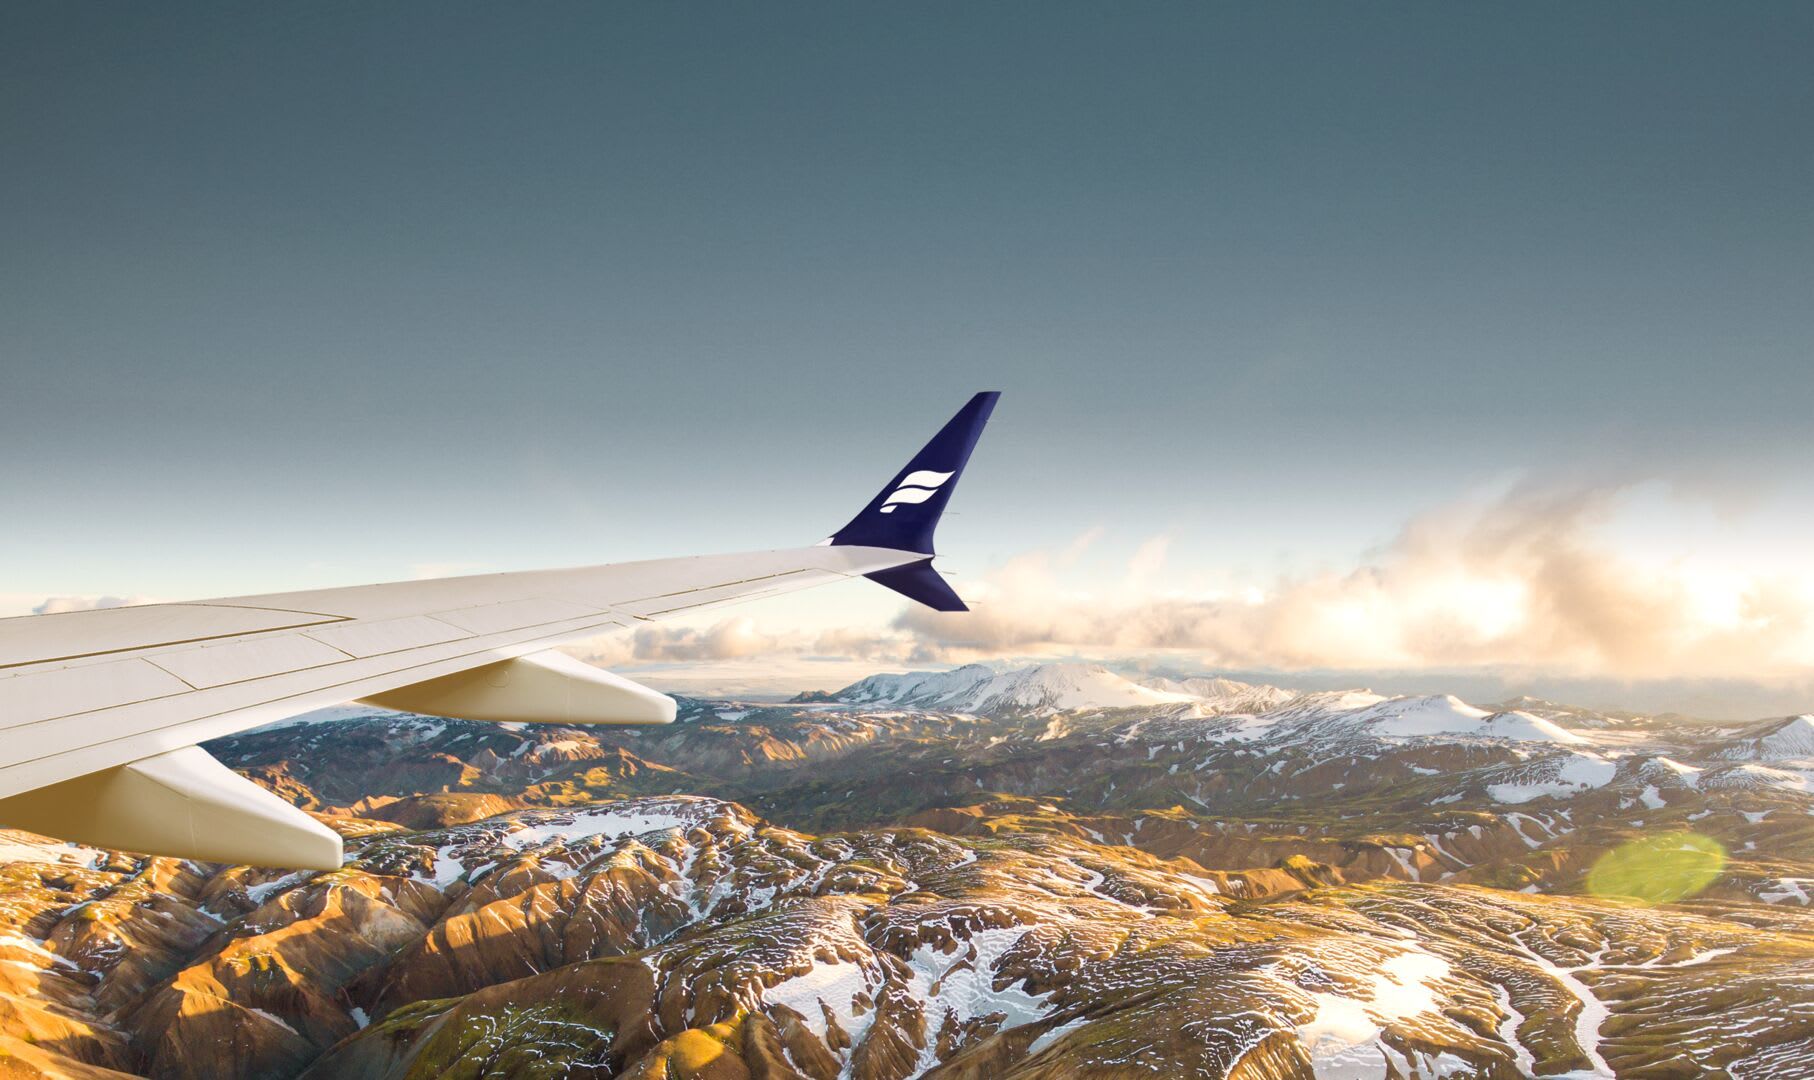 Icelandair Wingtip With Mountains Backdrop